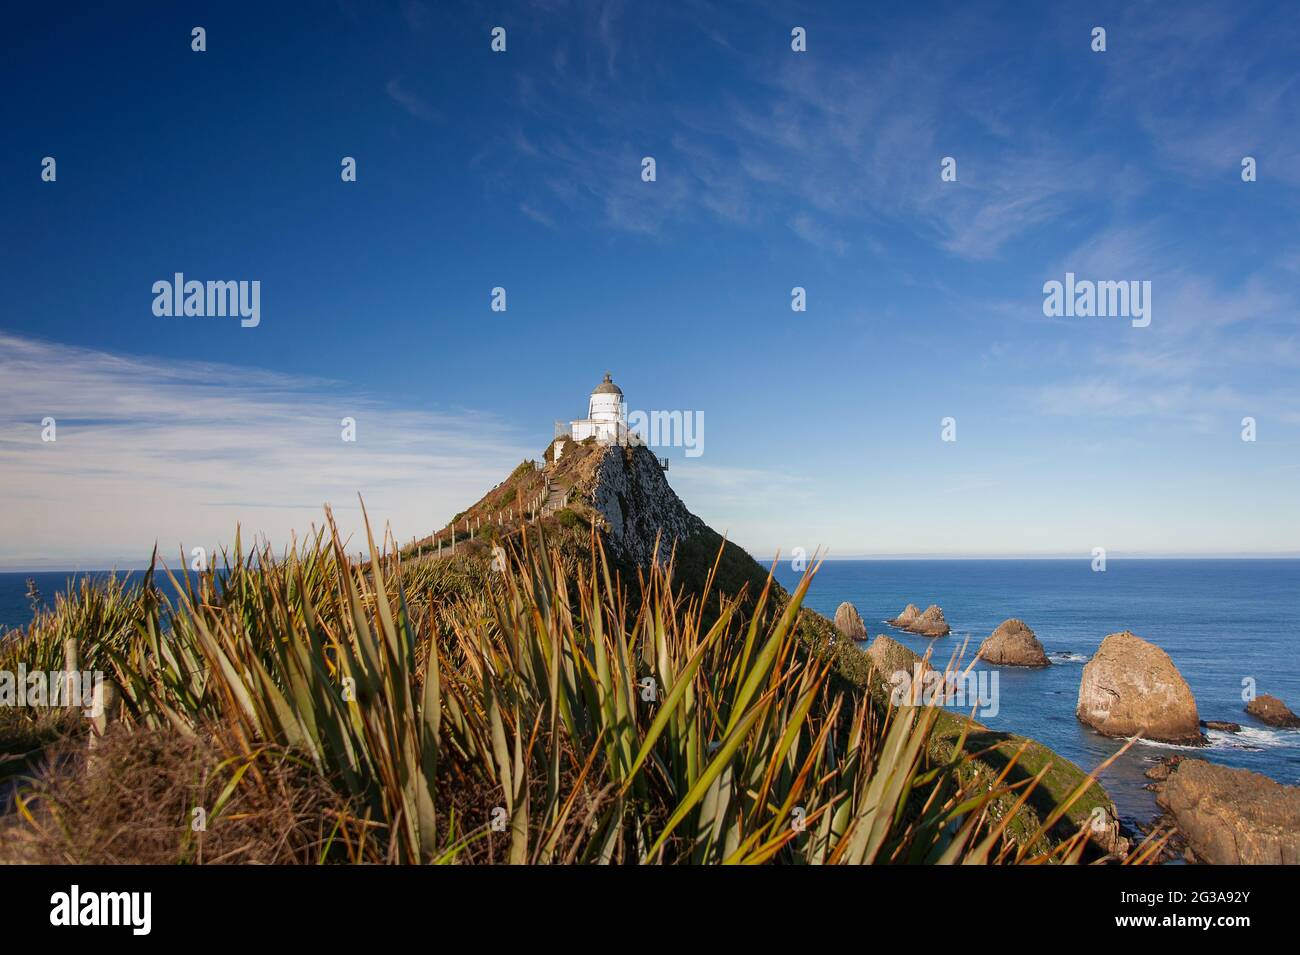 Nugget Point Lighthouse, Catlins Coast, New Zealand. Breathtaking scene, sunny foreground, deep blue ocean and sky Stock Photo